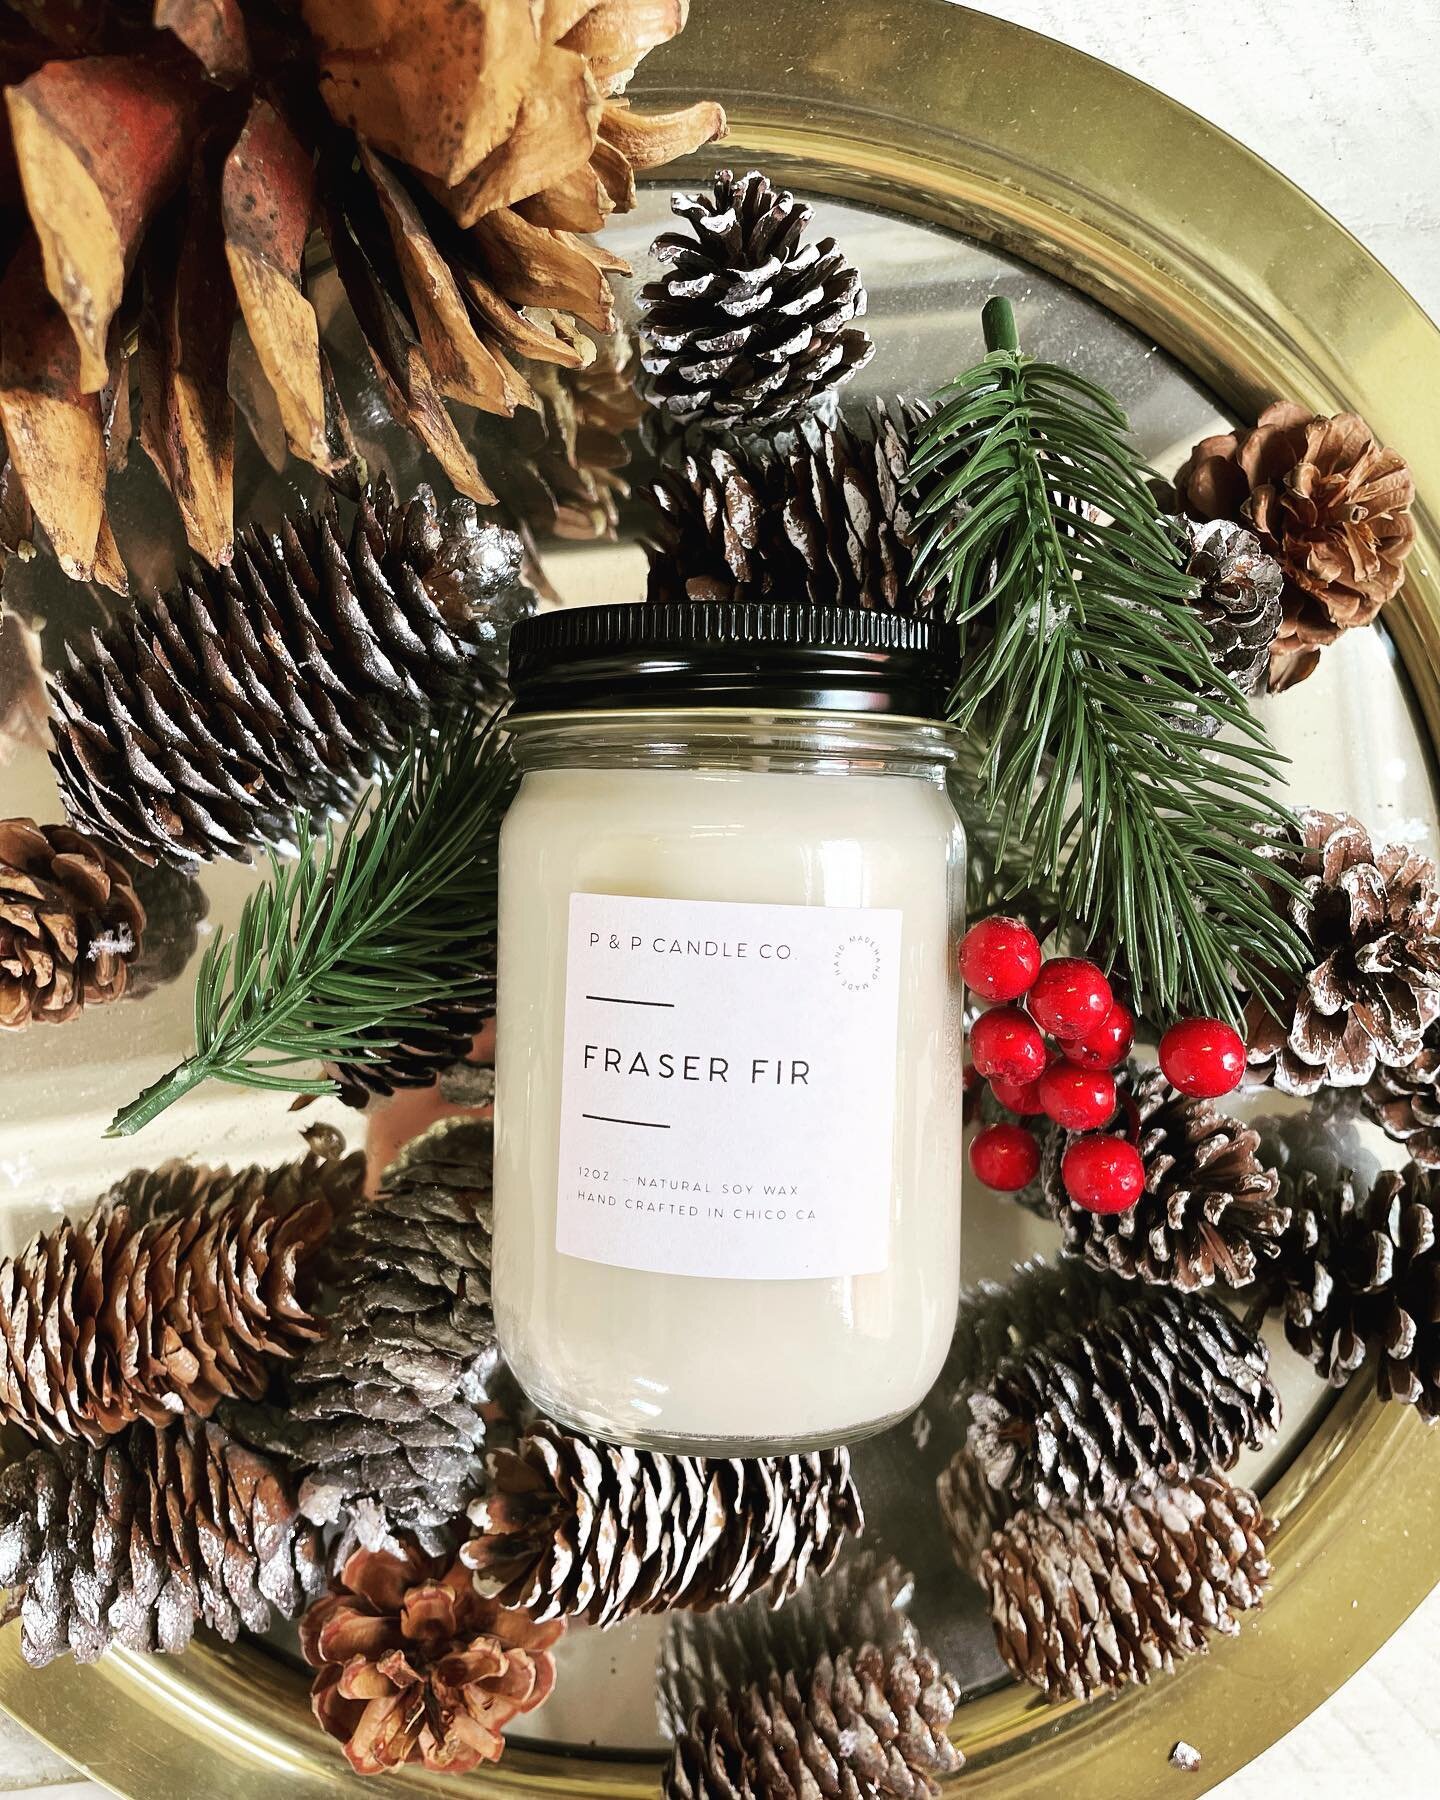 We are deep into holiday candles over here!! This is my favorite so far .. Fraser Fir.. Christmas tree in a jar 🕯🌲
.
#soywax
#wholesalecandles 
#boutiqueshopping 
#holidaycandles 
#fraserfir 
#soycandles 
#candlesofinstagram 
#christmasdecor